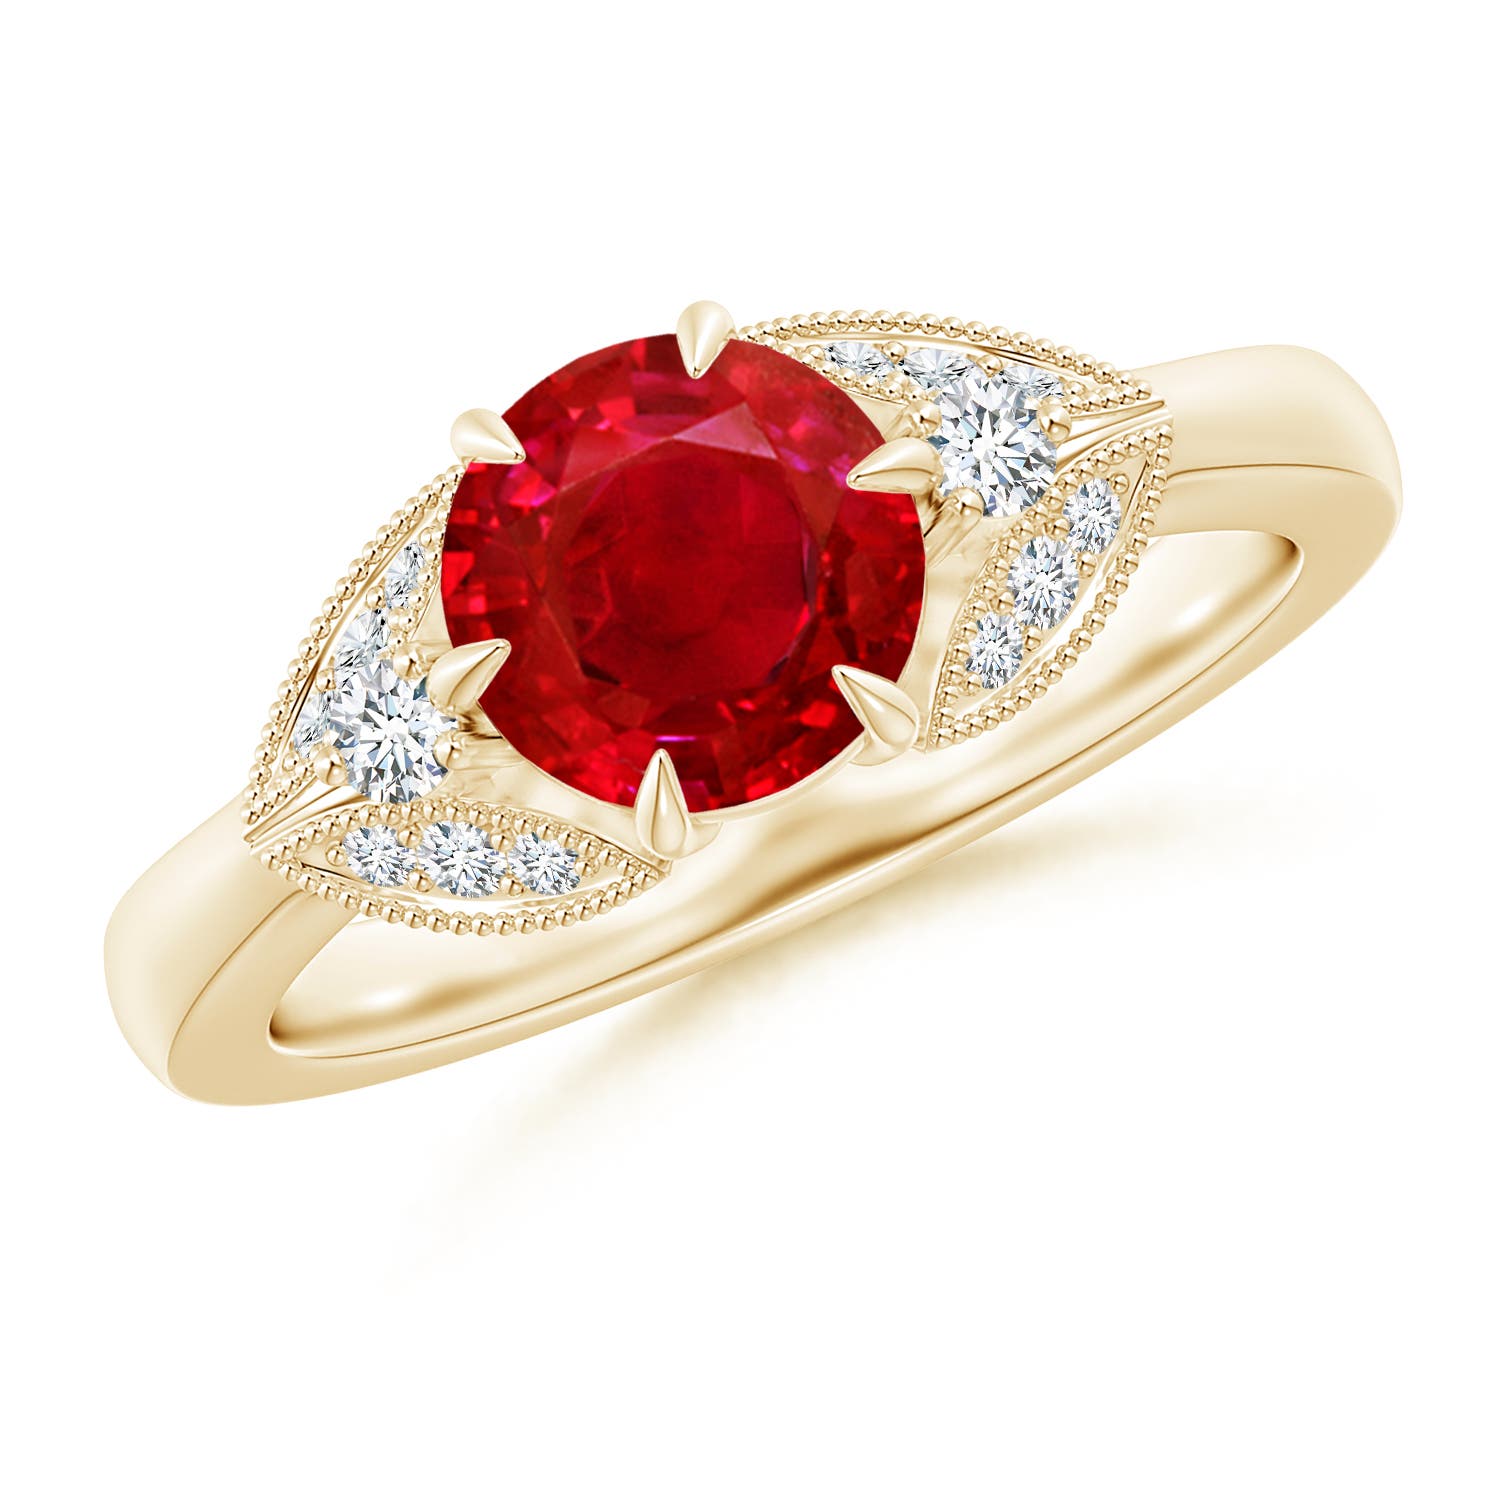 AAA - Ruby / 1.64 CT / 14 KT Yellow Gold